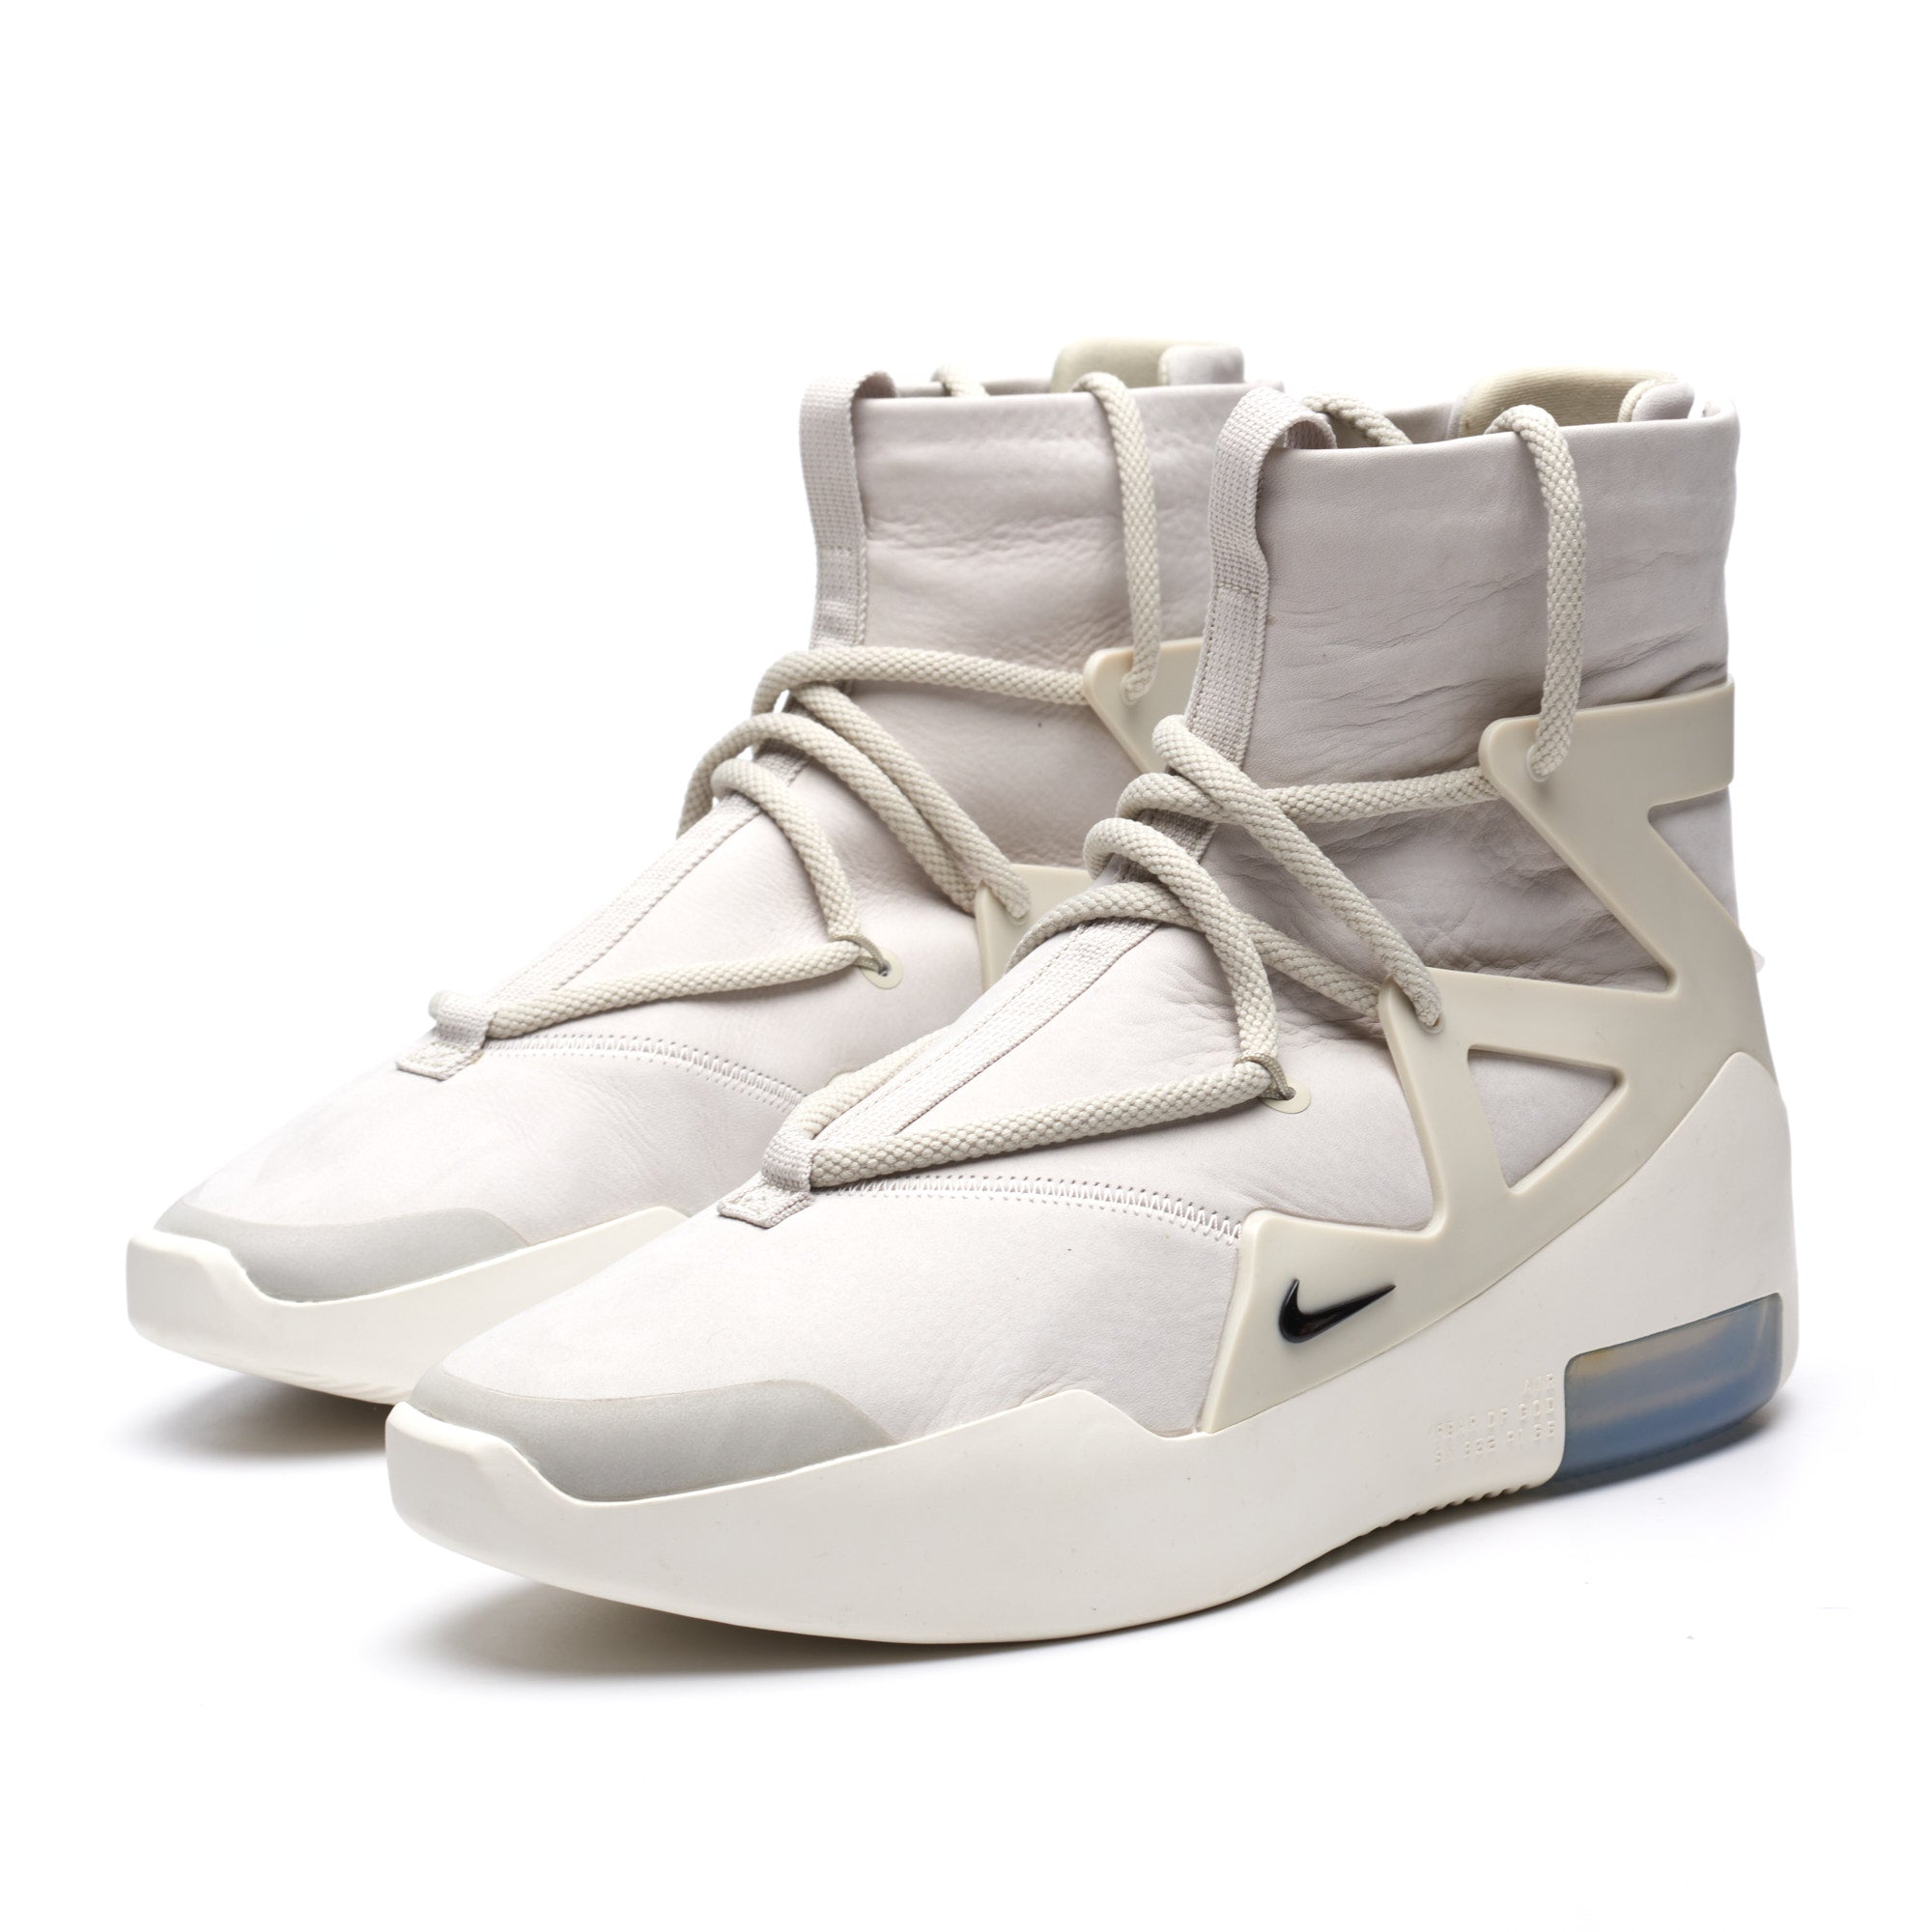 NIKE AIR x FEAR OF GOD 1 Light Bone High Top Sneakers Shoes US 9.5 NEW with Box